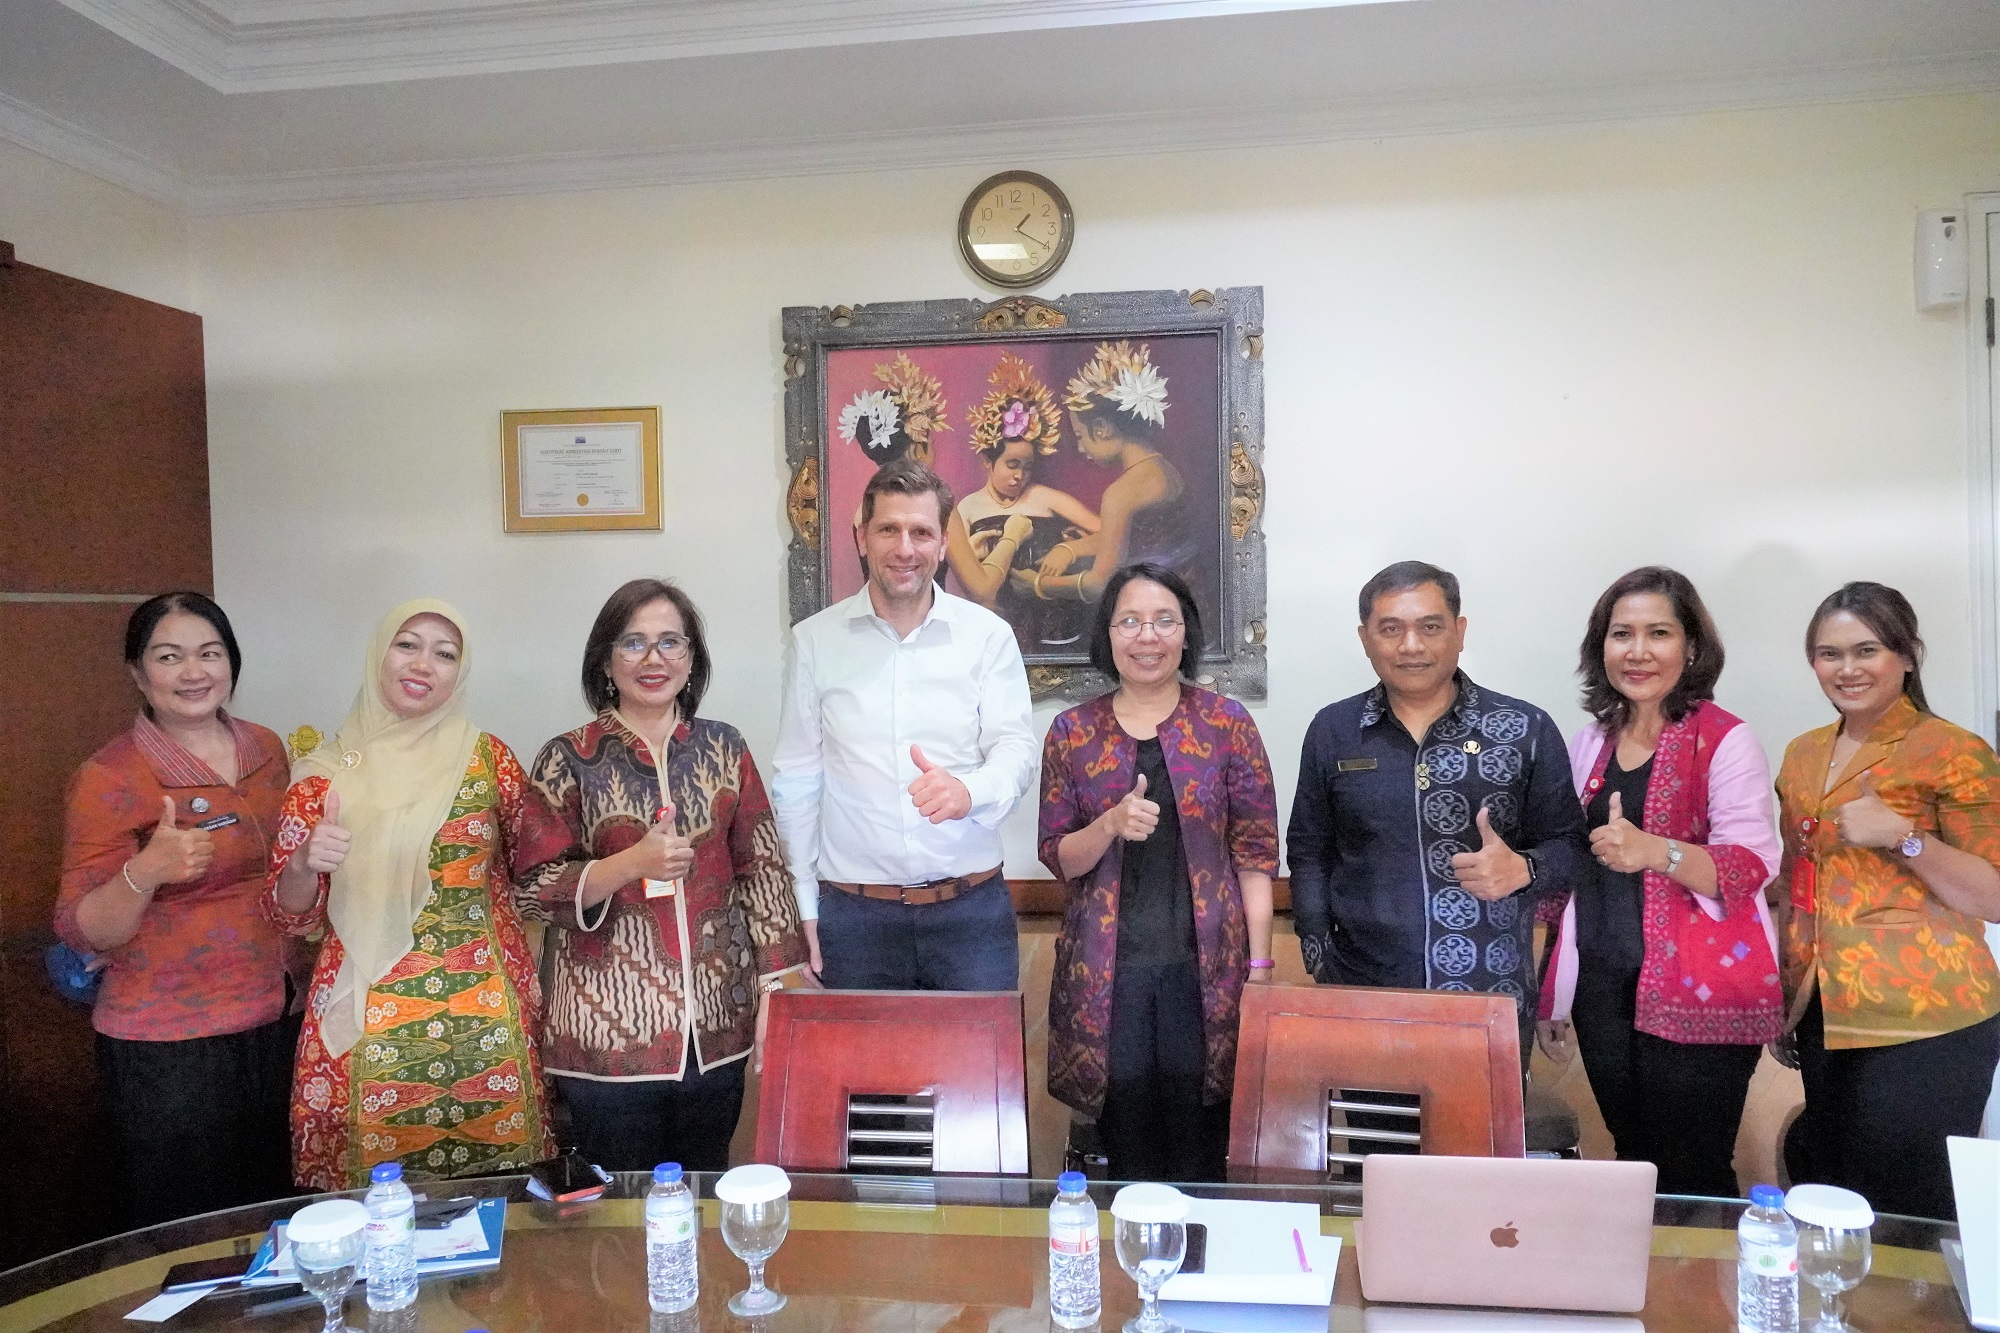 Prima Medika received a visit from the Director General of Public Health, Ministry of Health of the Republic of Indonesia